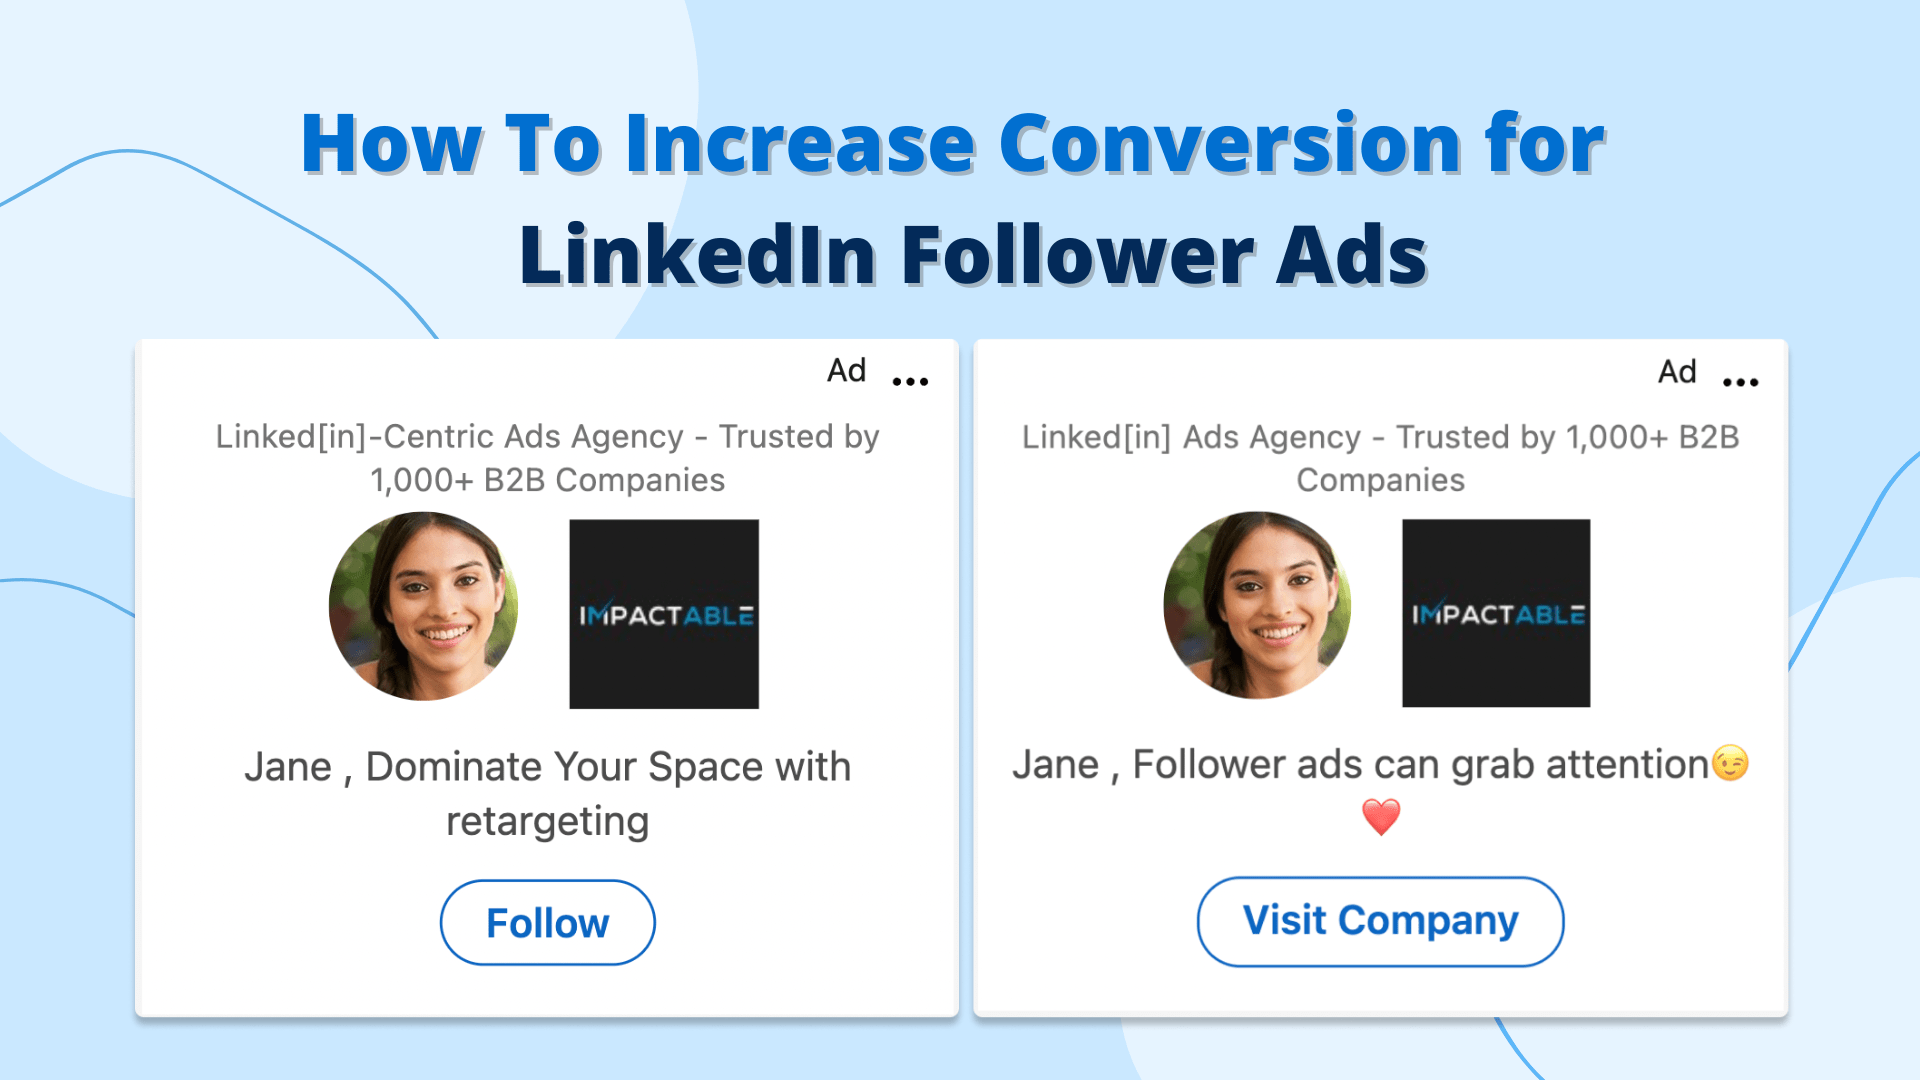 How To Increase Conversion for LinkedIn Follower Ads